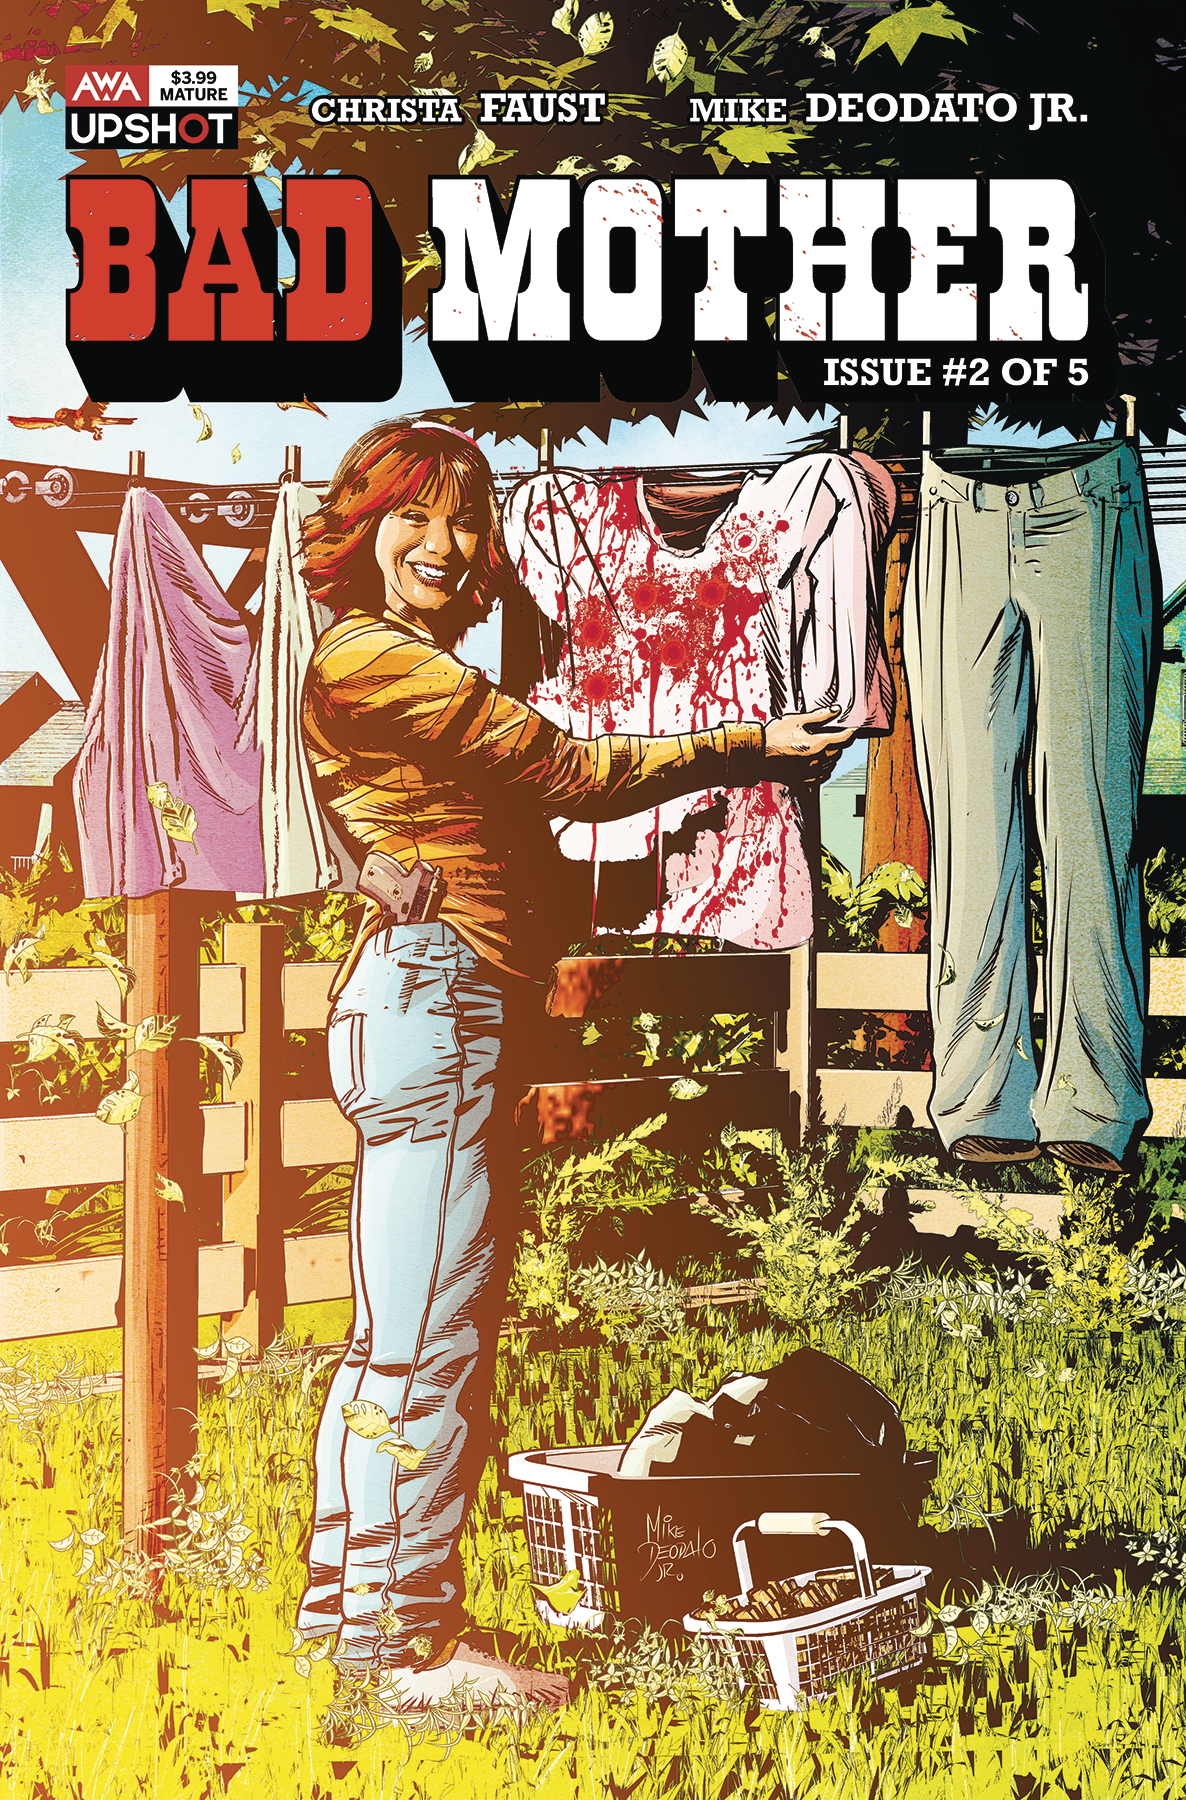 Bad Mother #2 (Mature) (Of 5)